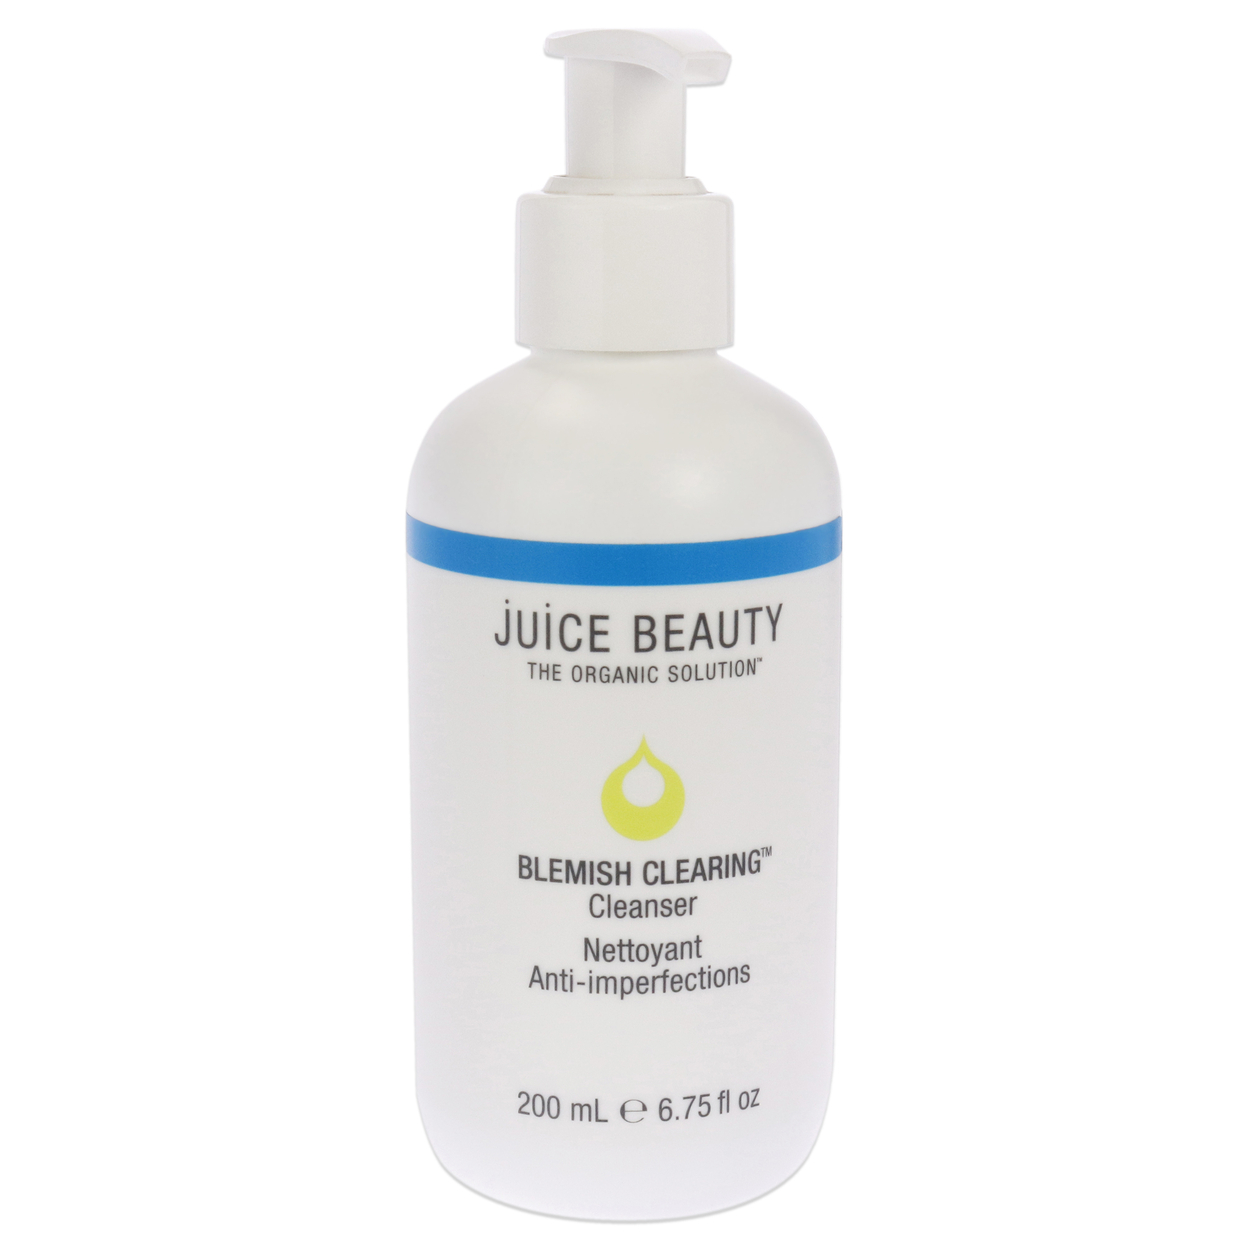 Juice Beauty Blemish Clearing Cleanser 6.75 Oz